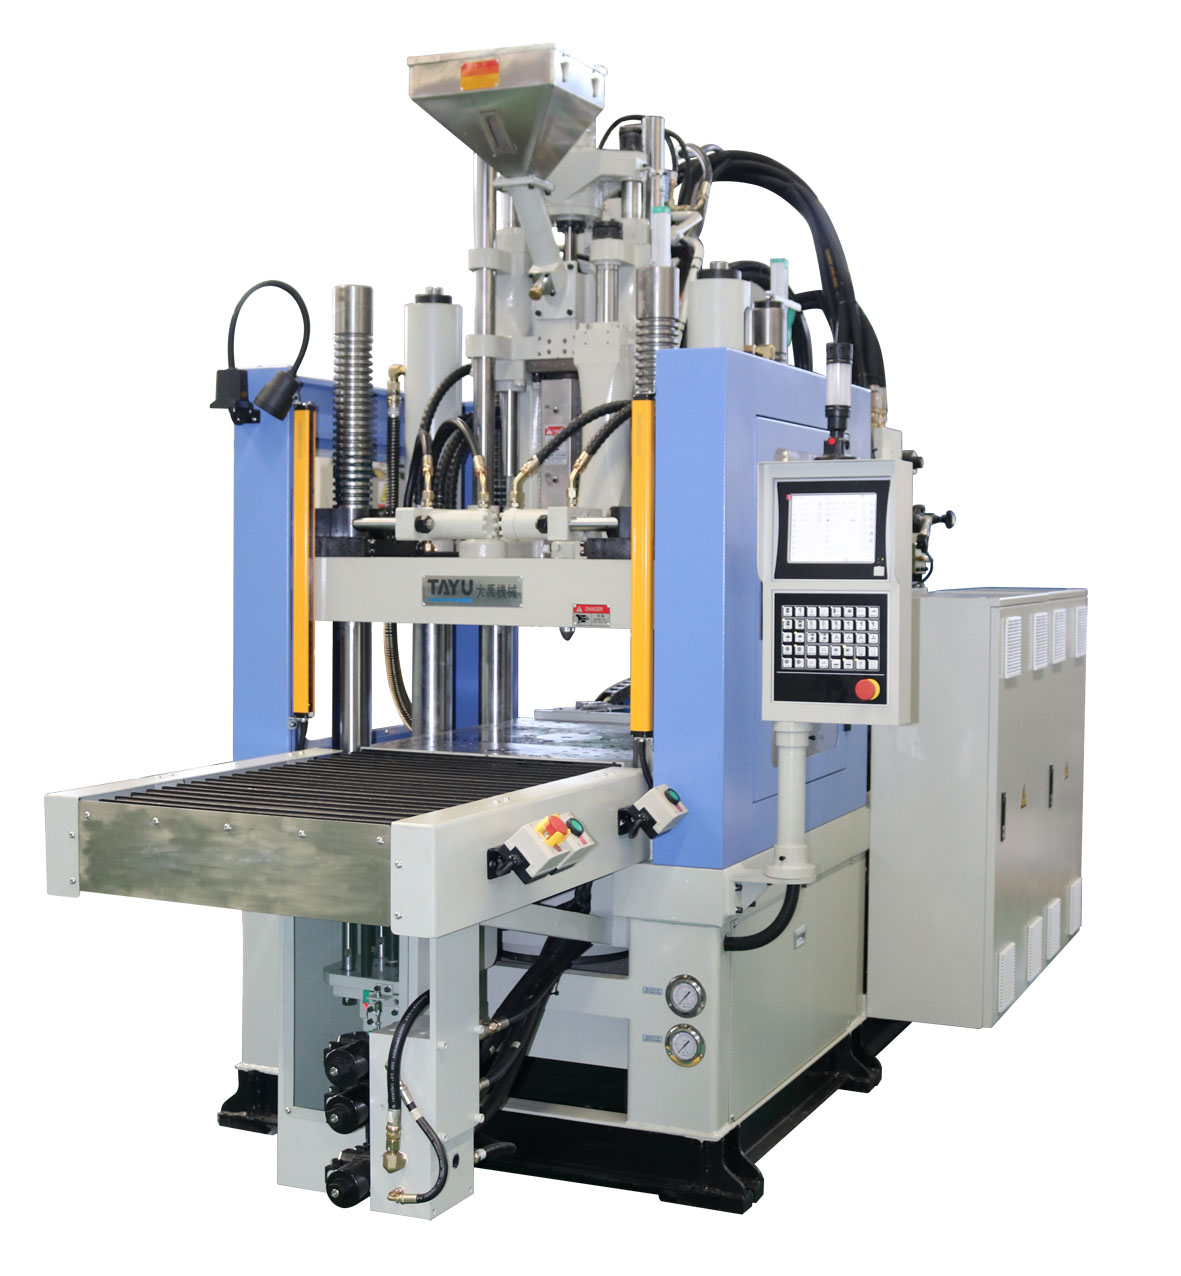 TYM-1600S vertical injection molding machine